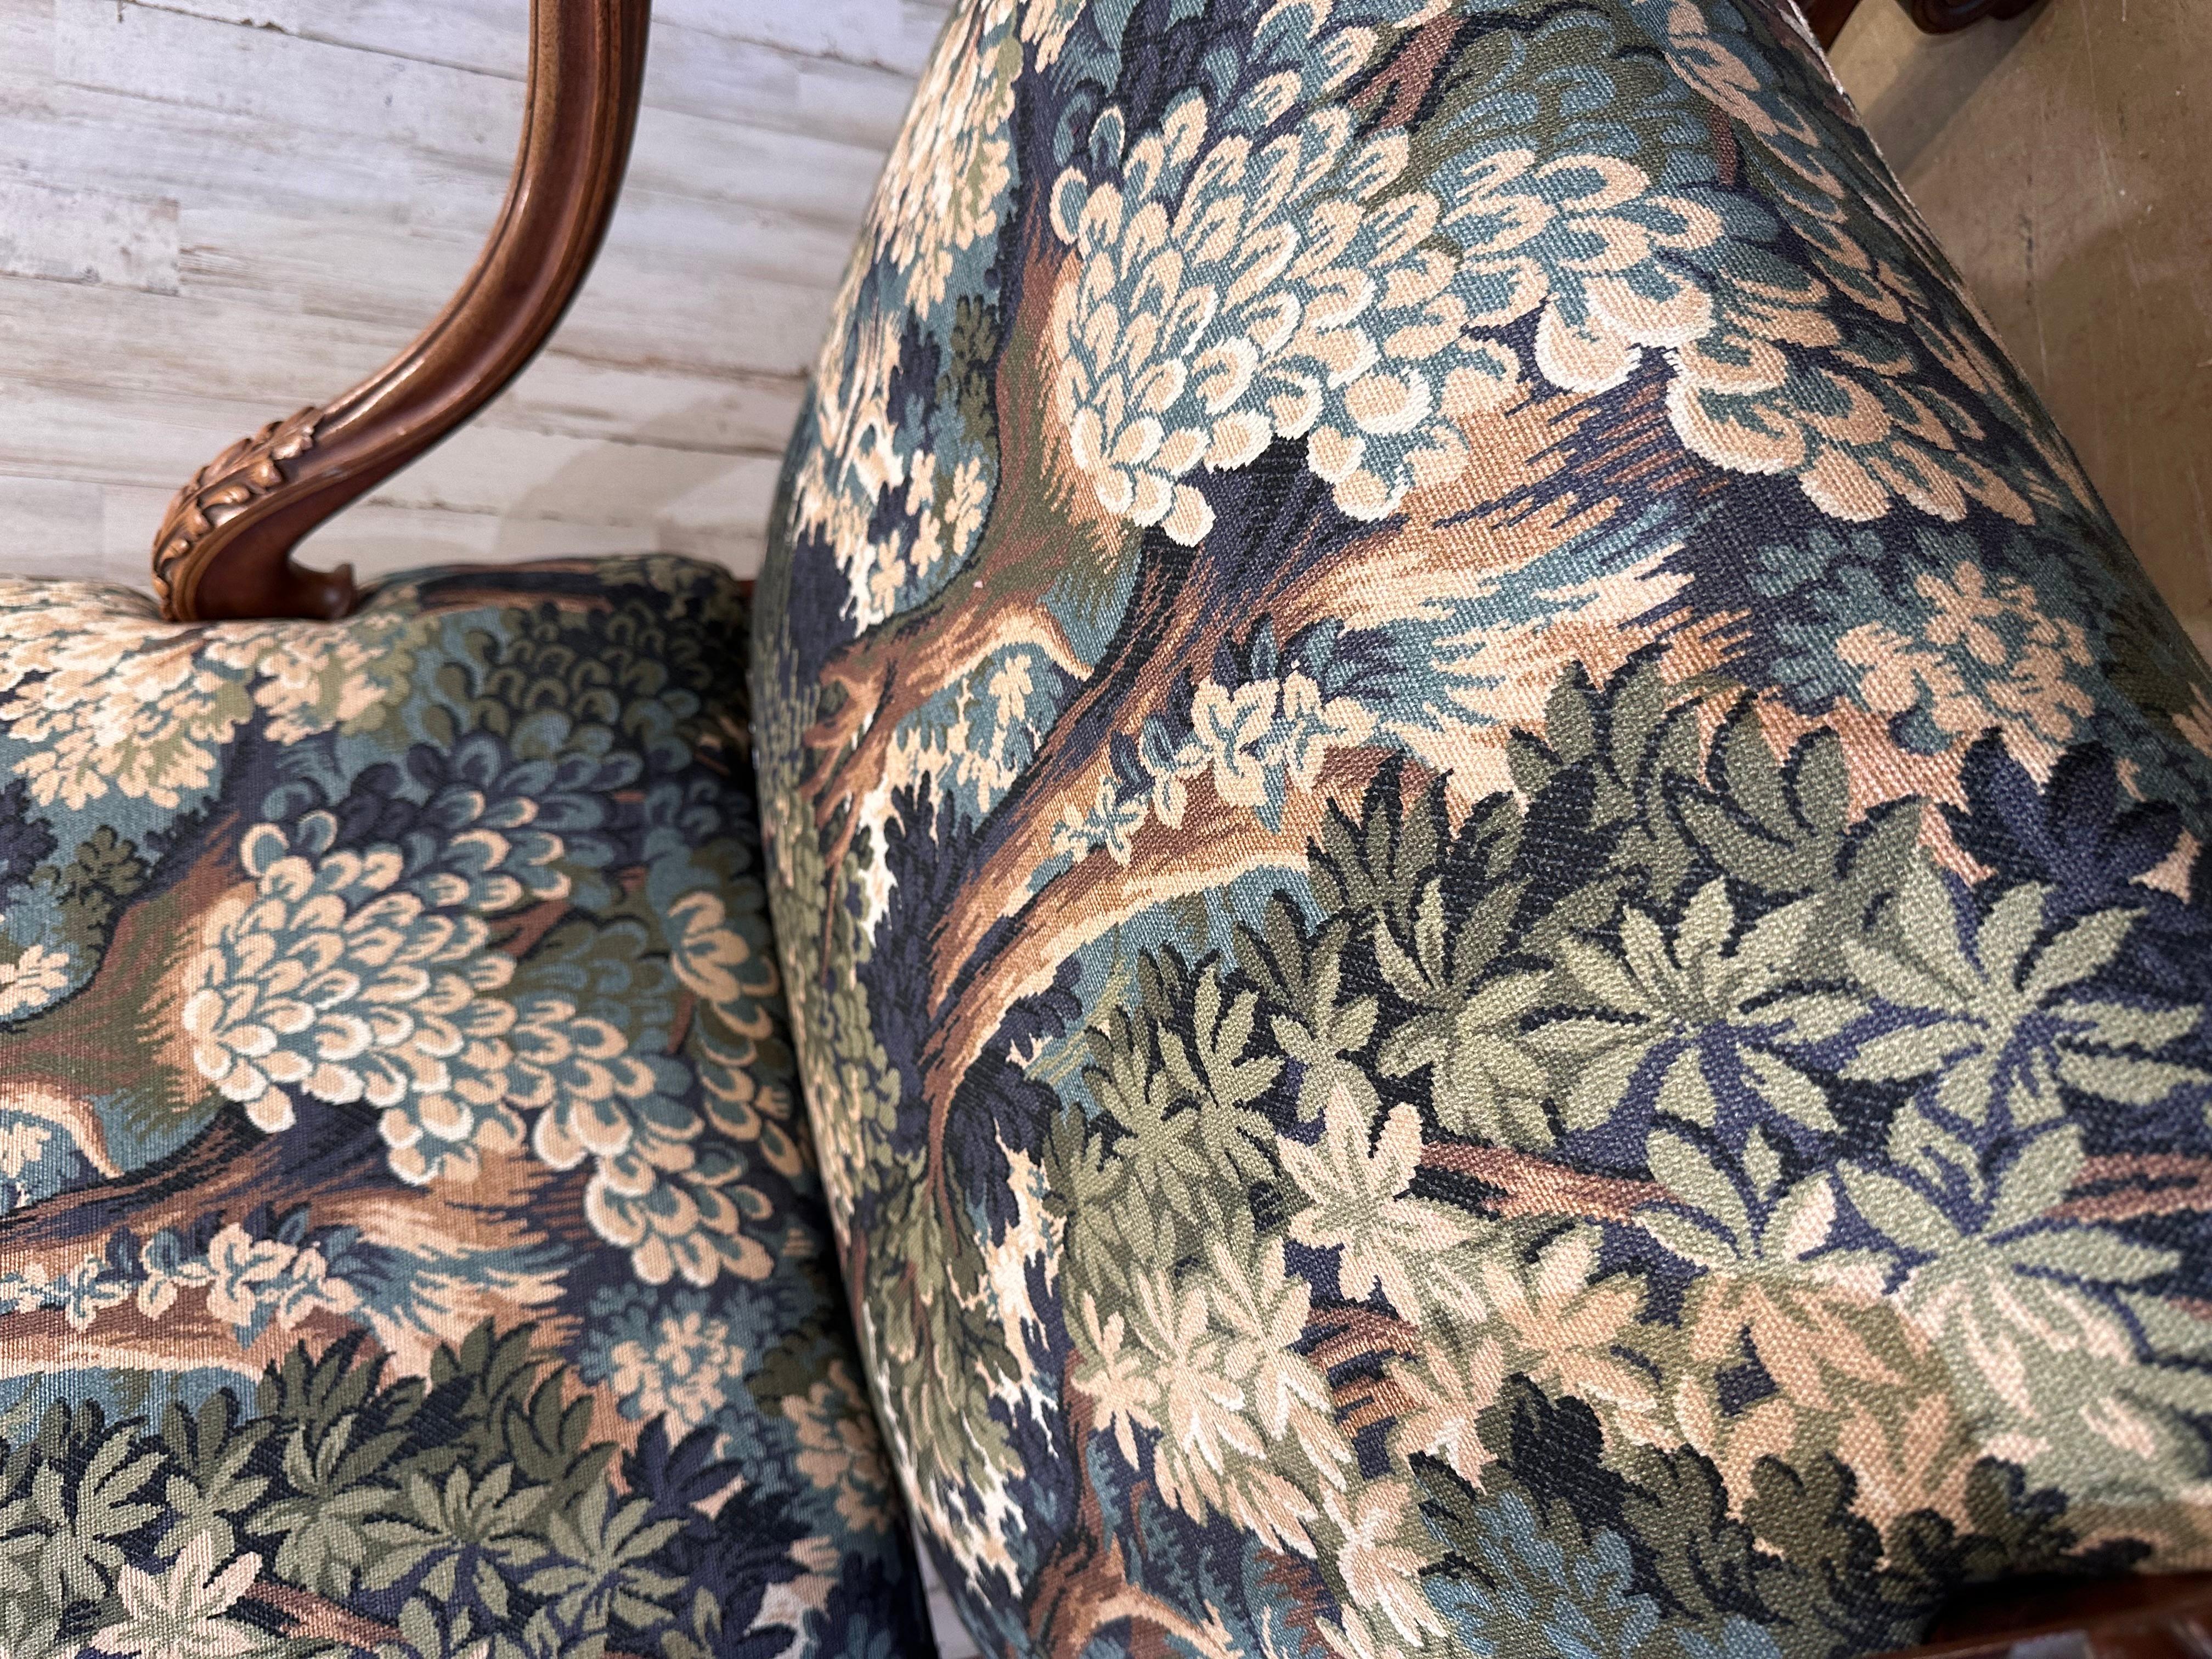 This is a beautiful antique French chair frame that has recently been reupholstered! The new fabric is a gorgeous forest print with deep blue, green, and brown tones mixing with lighter cream and sage hues to create a colorful pattern of leaves and